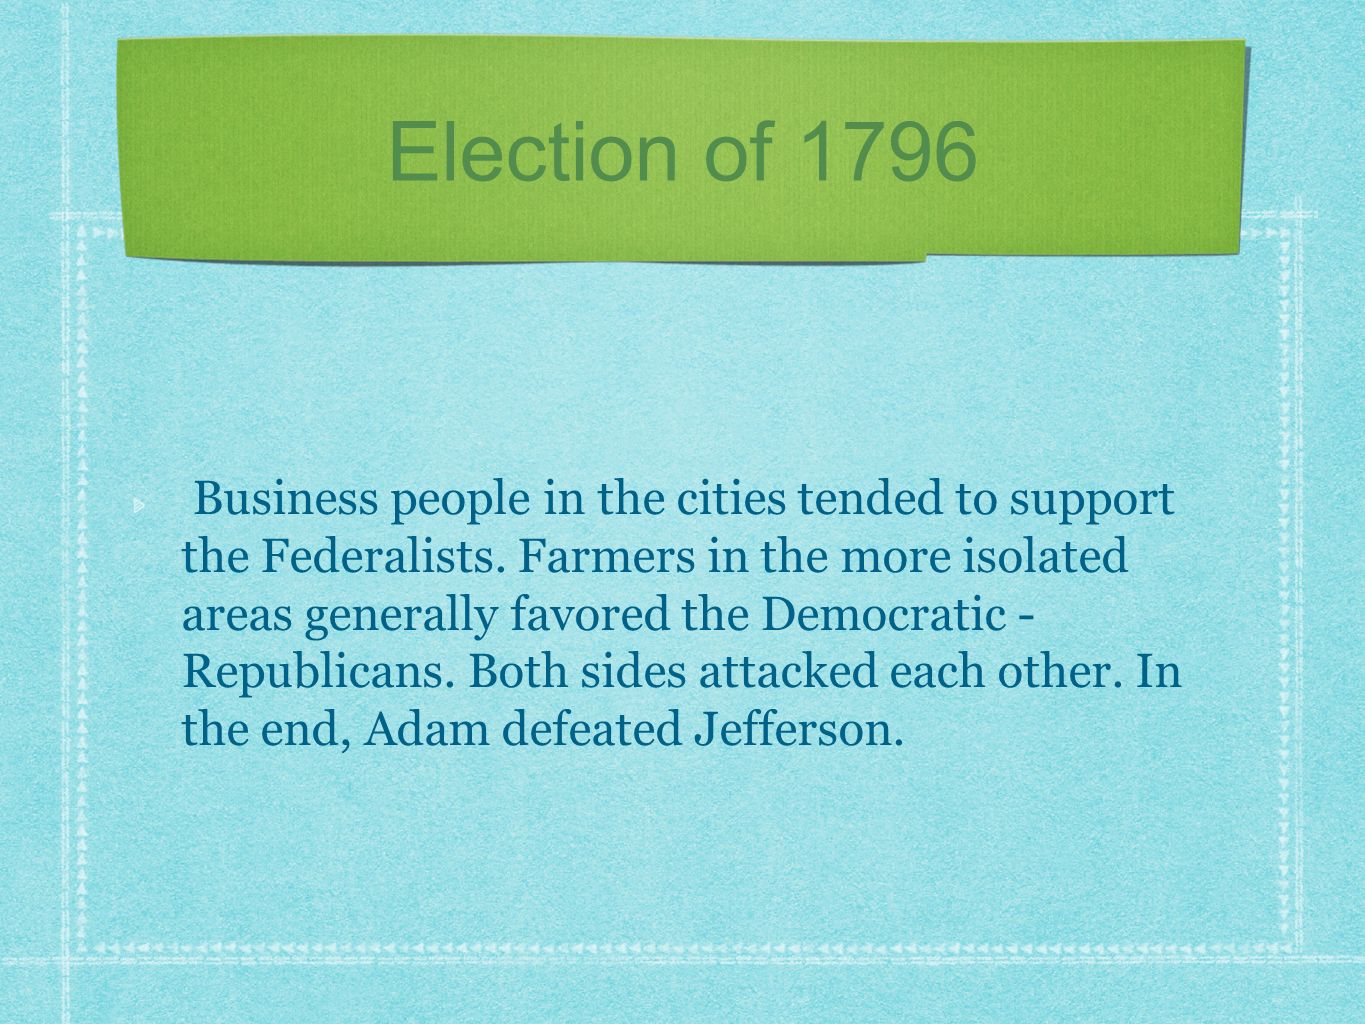 Election of 1796 Business people in the cities tended to support the Federalists.